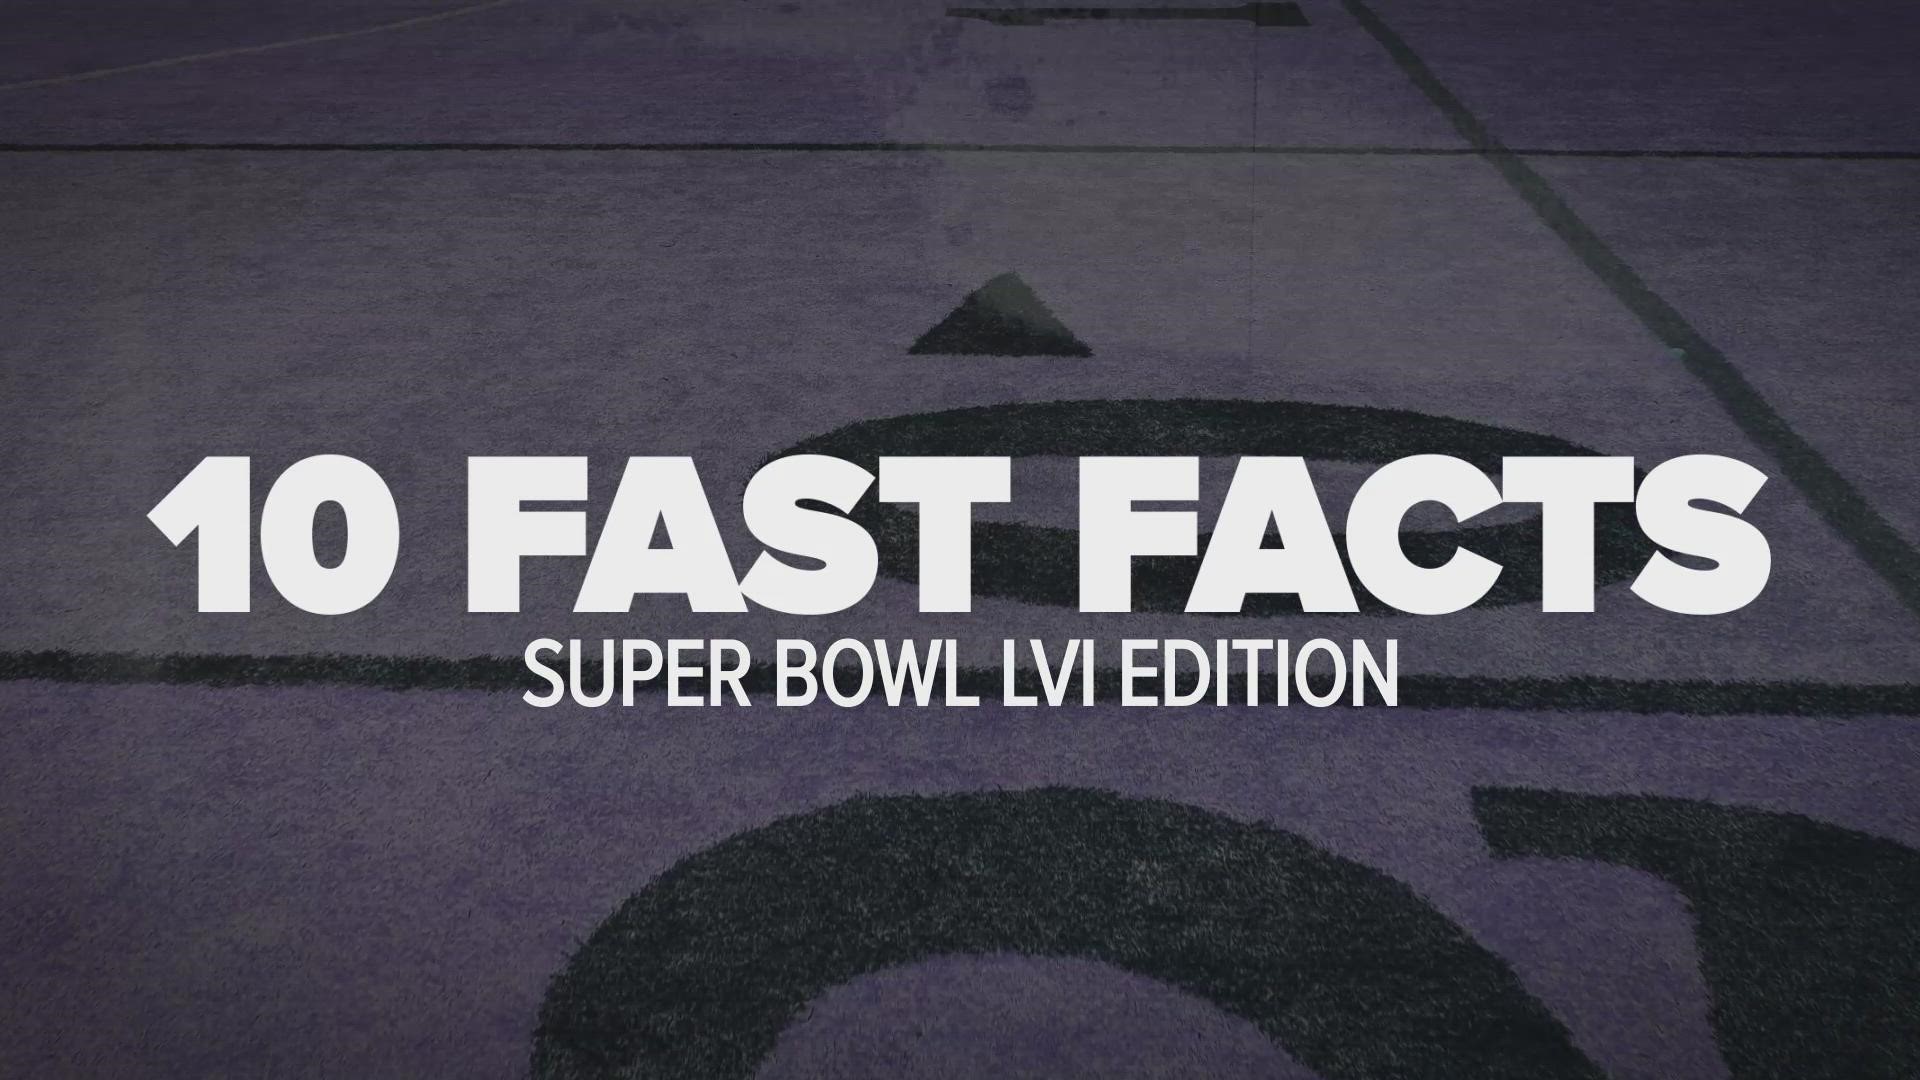 Get ready for the big game with 10 facts about Super Bowl LVI and the matchup between the Los Angeles Rams and the Cincinnati Bengals.